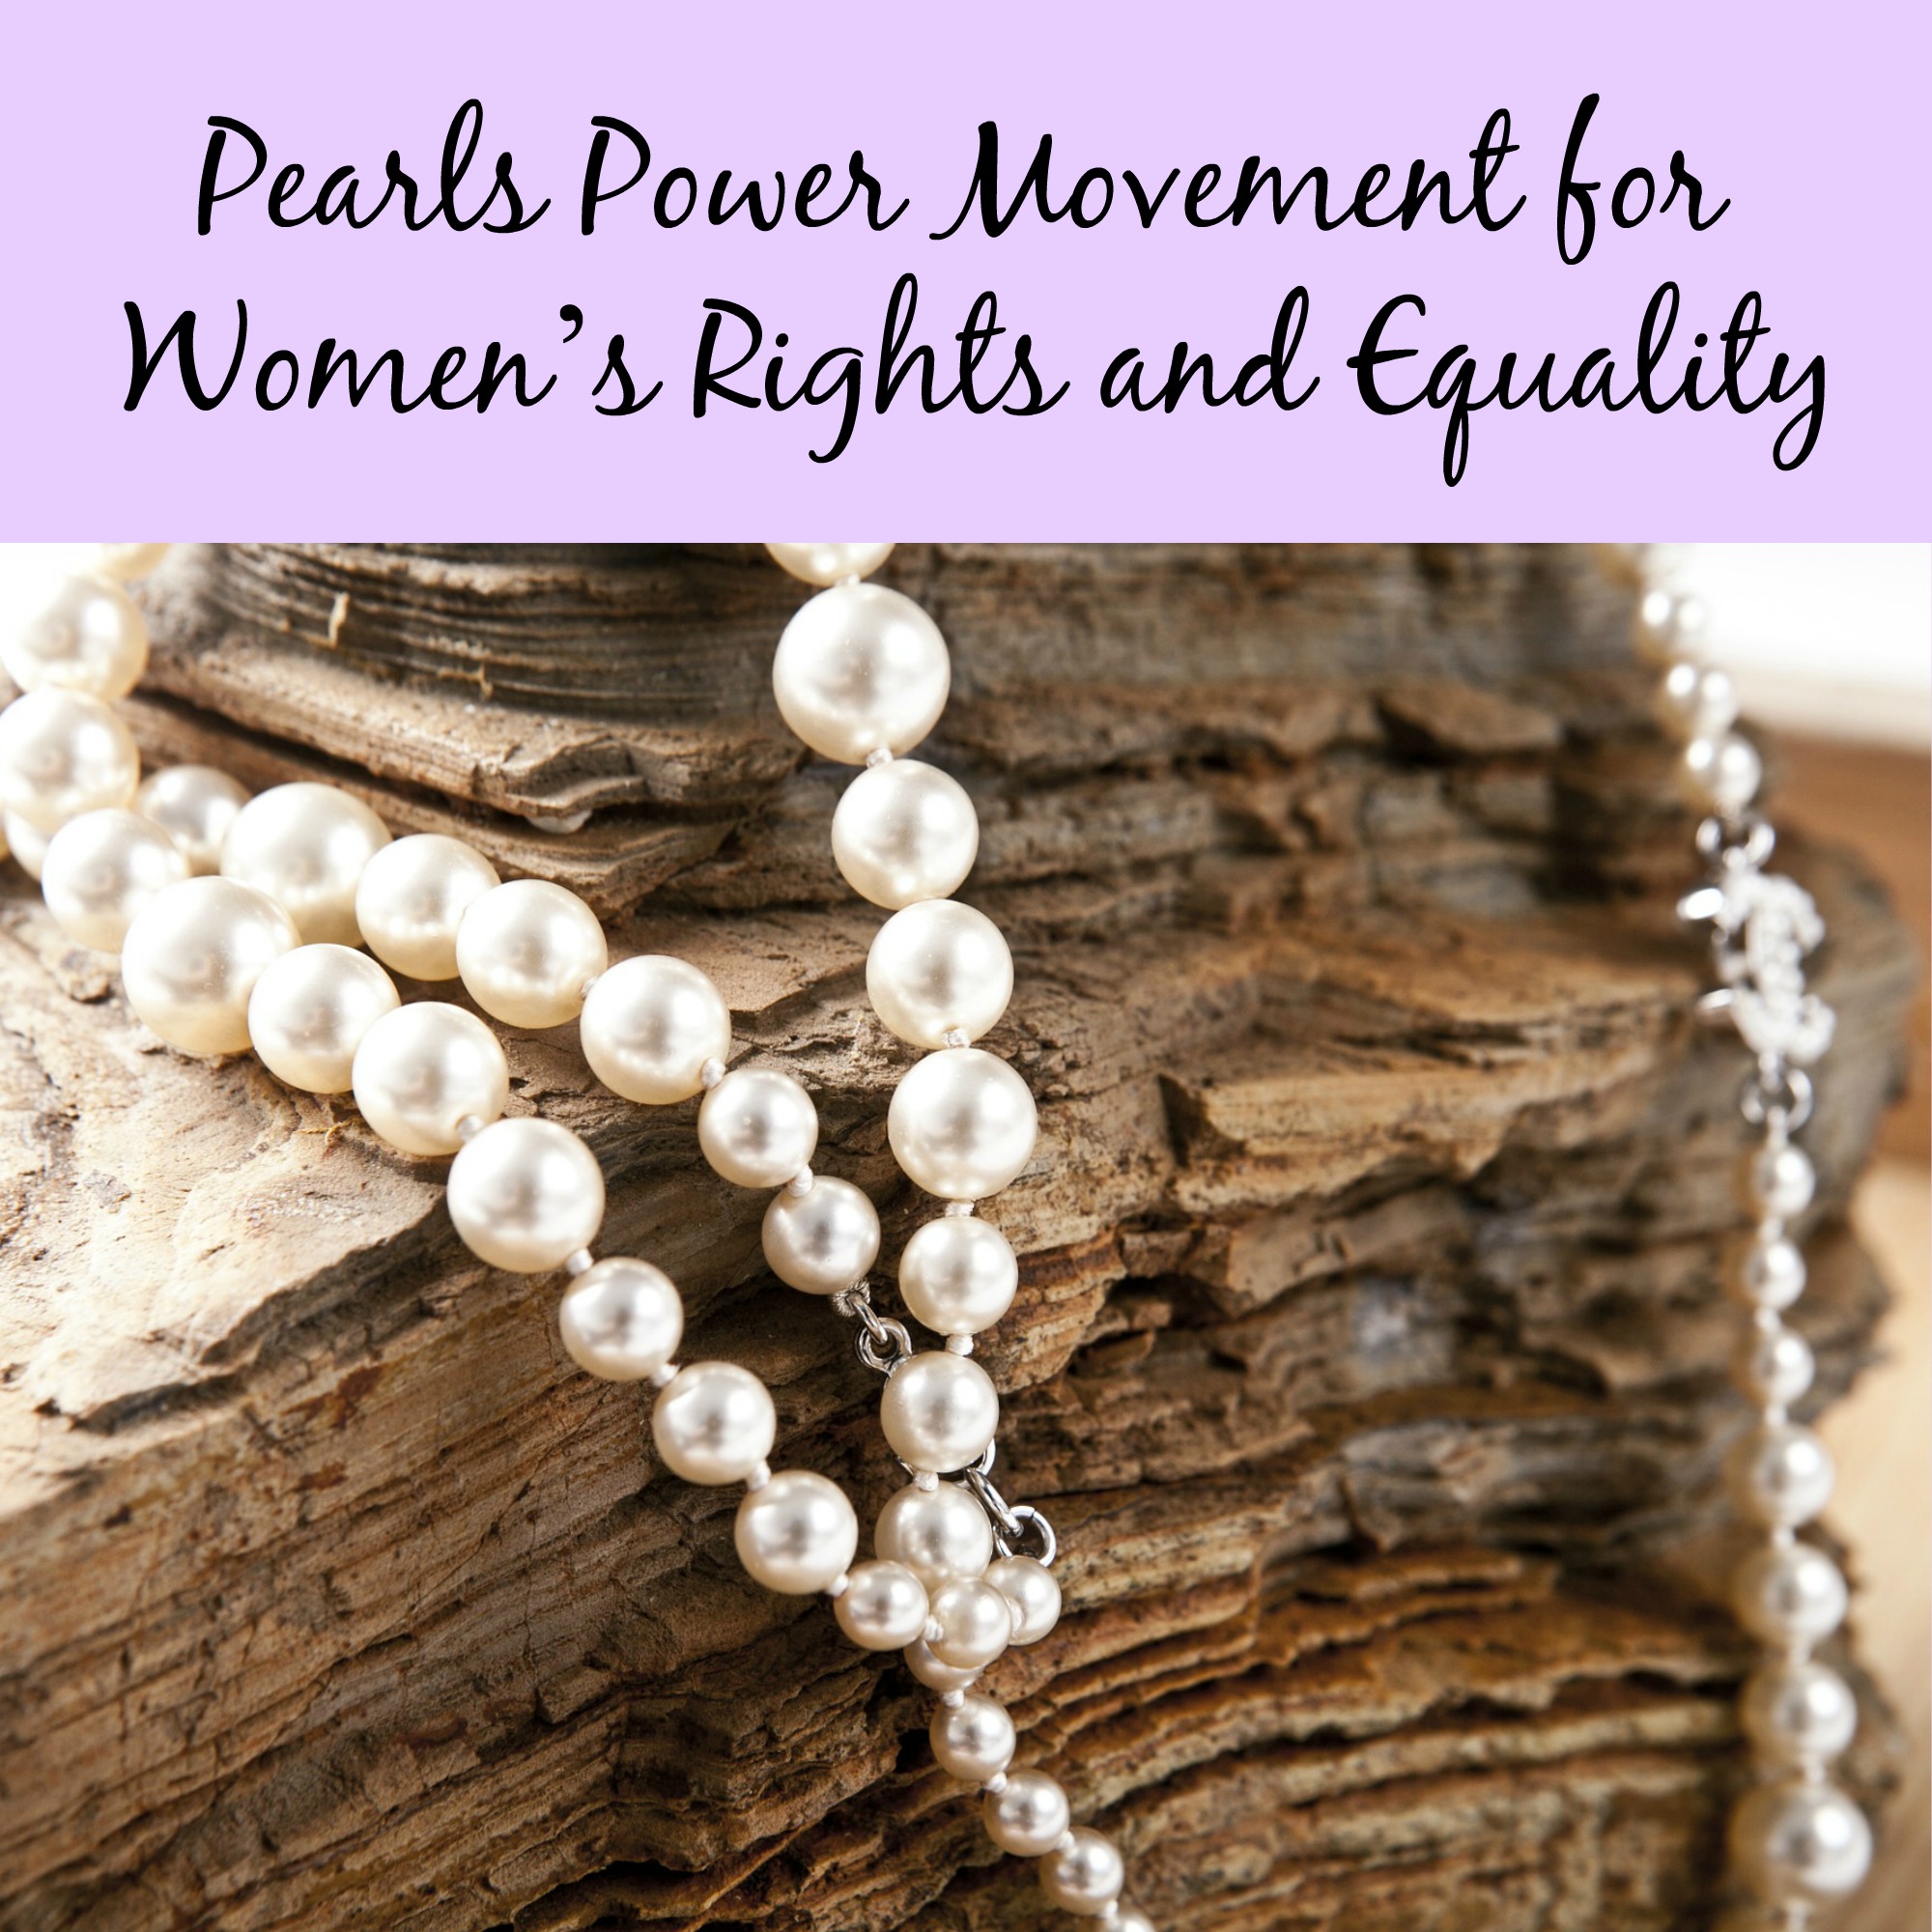 Pearls Power Movement for Women’s Rights and Equality